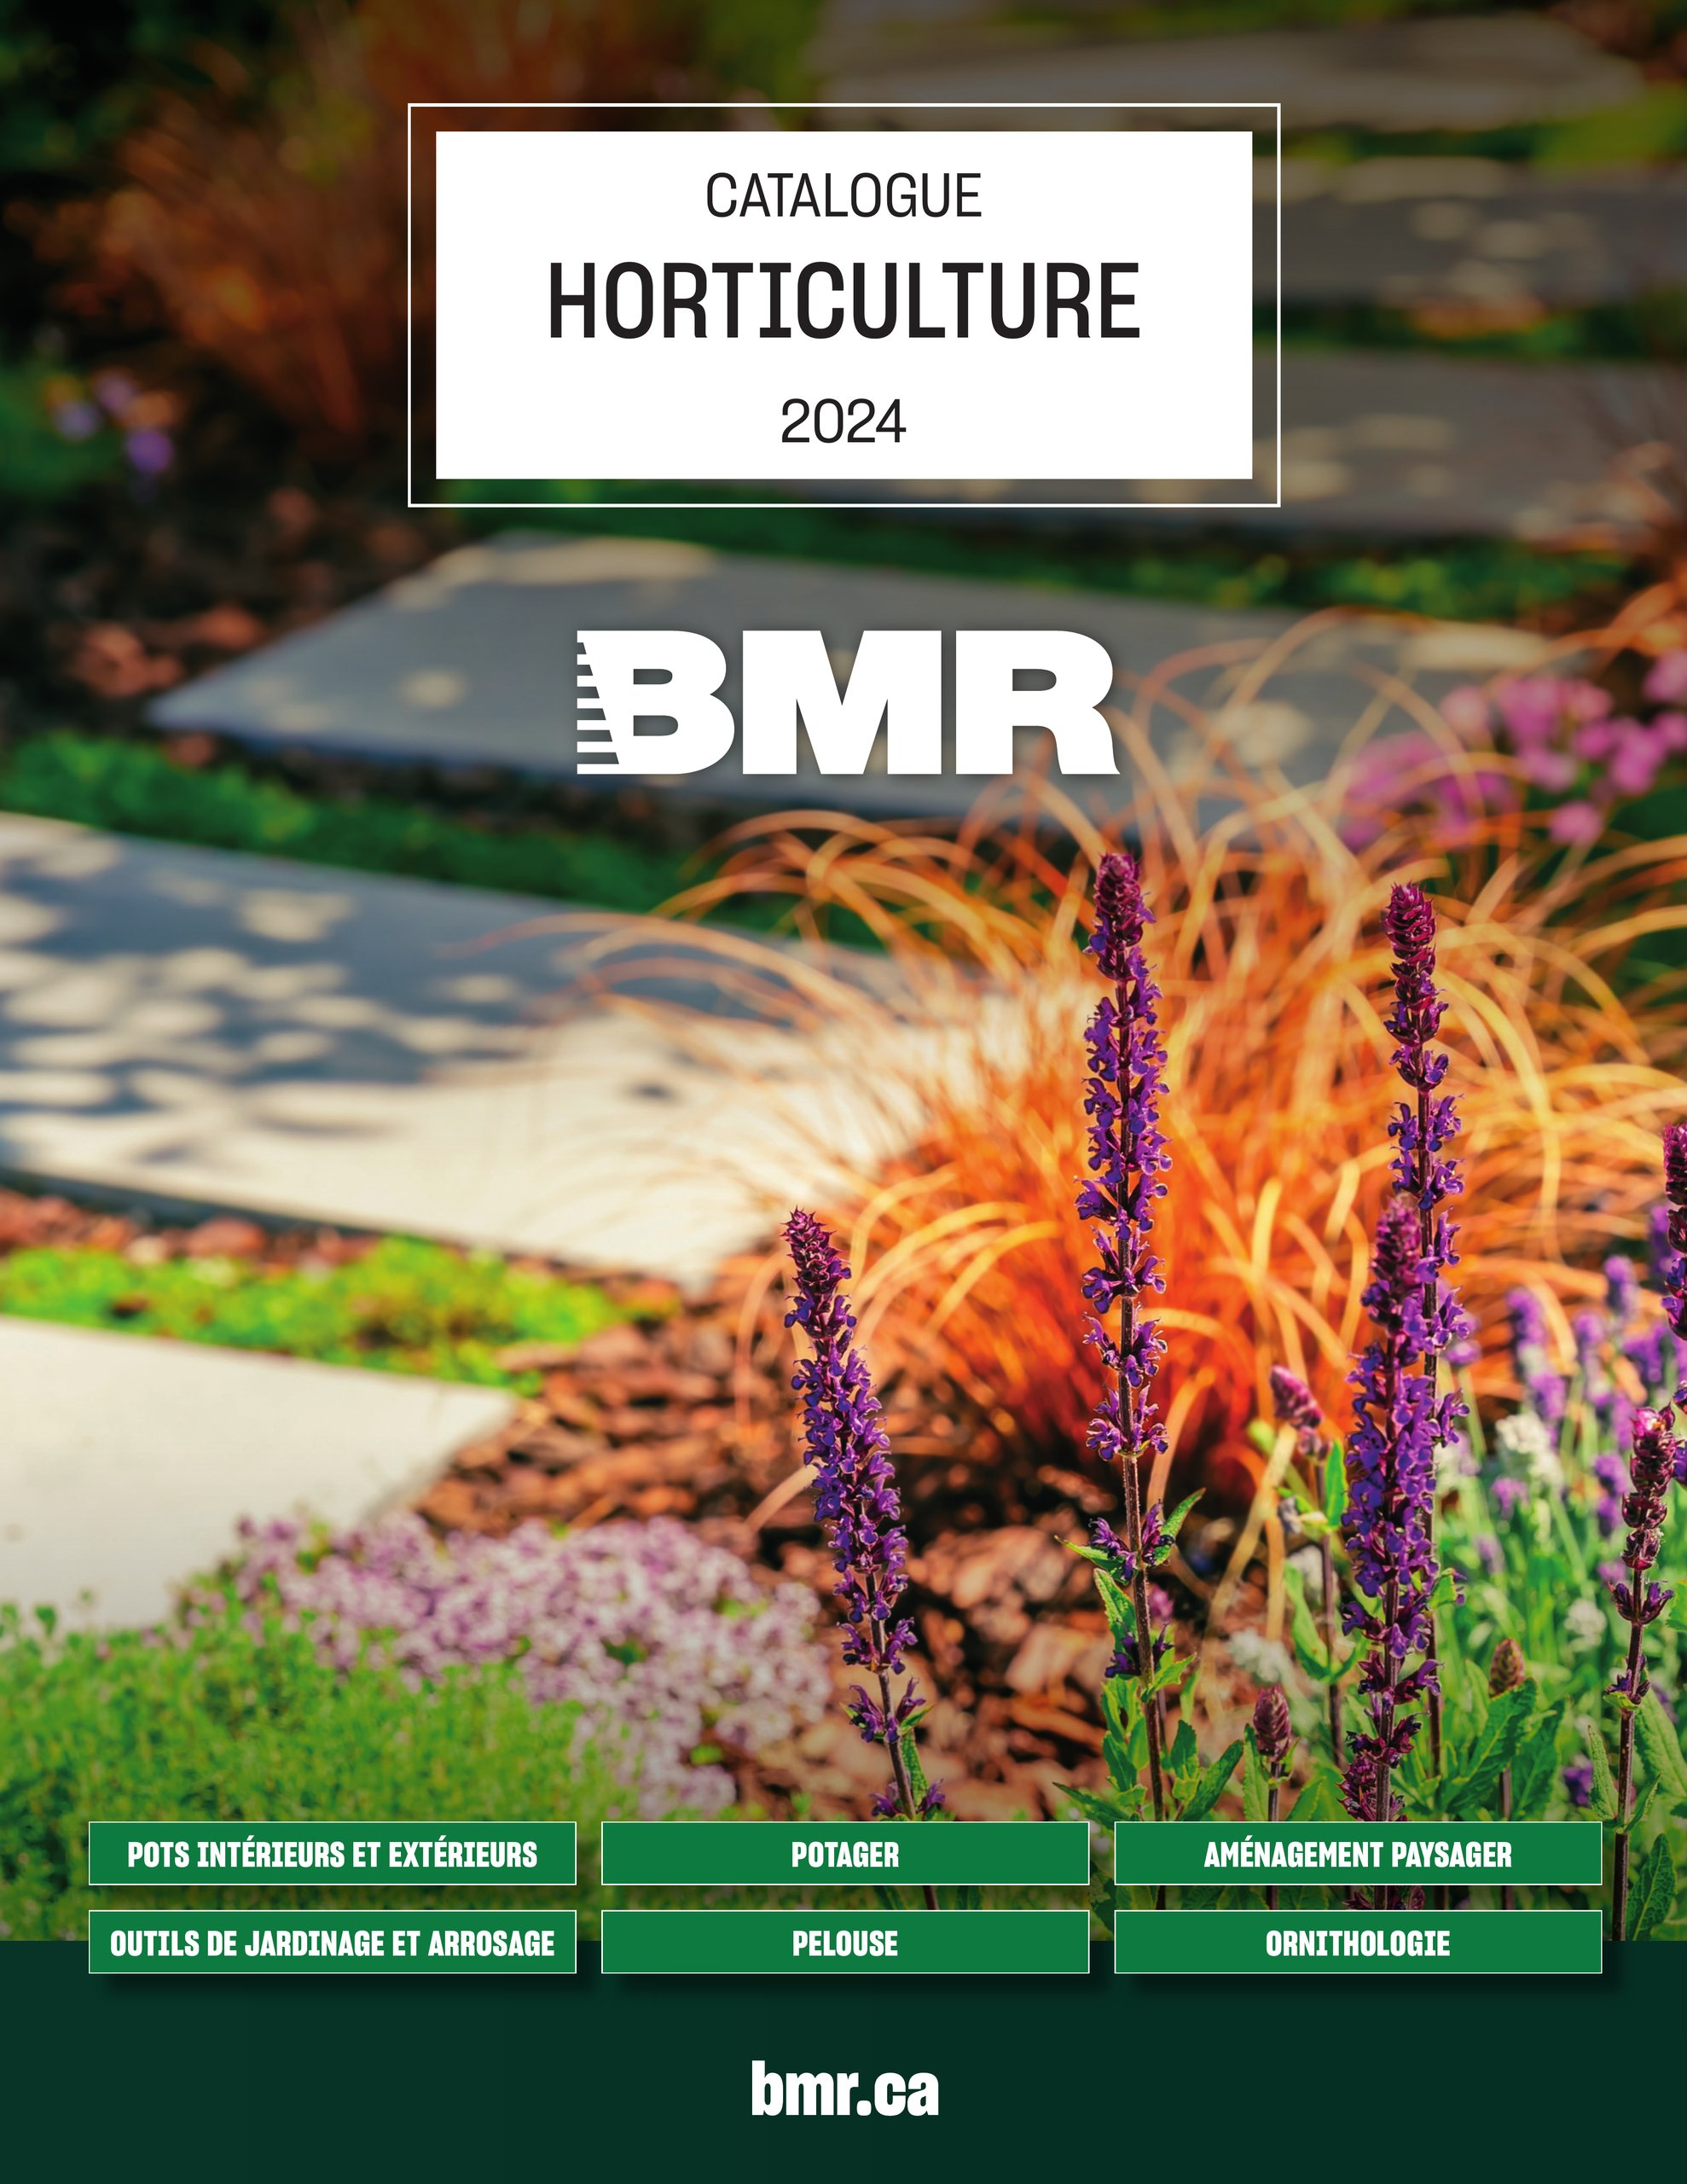 Circulaire BMR - Catalogue Horticulture 2024 - Page 1